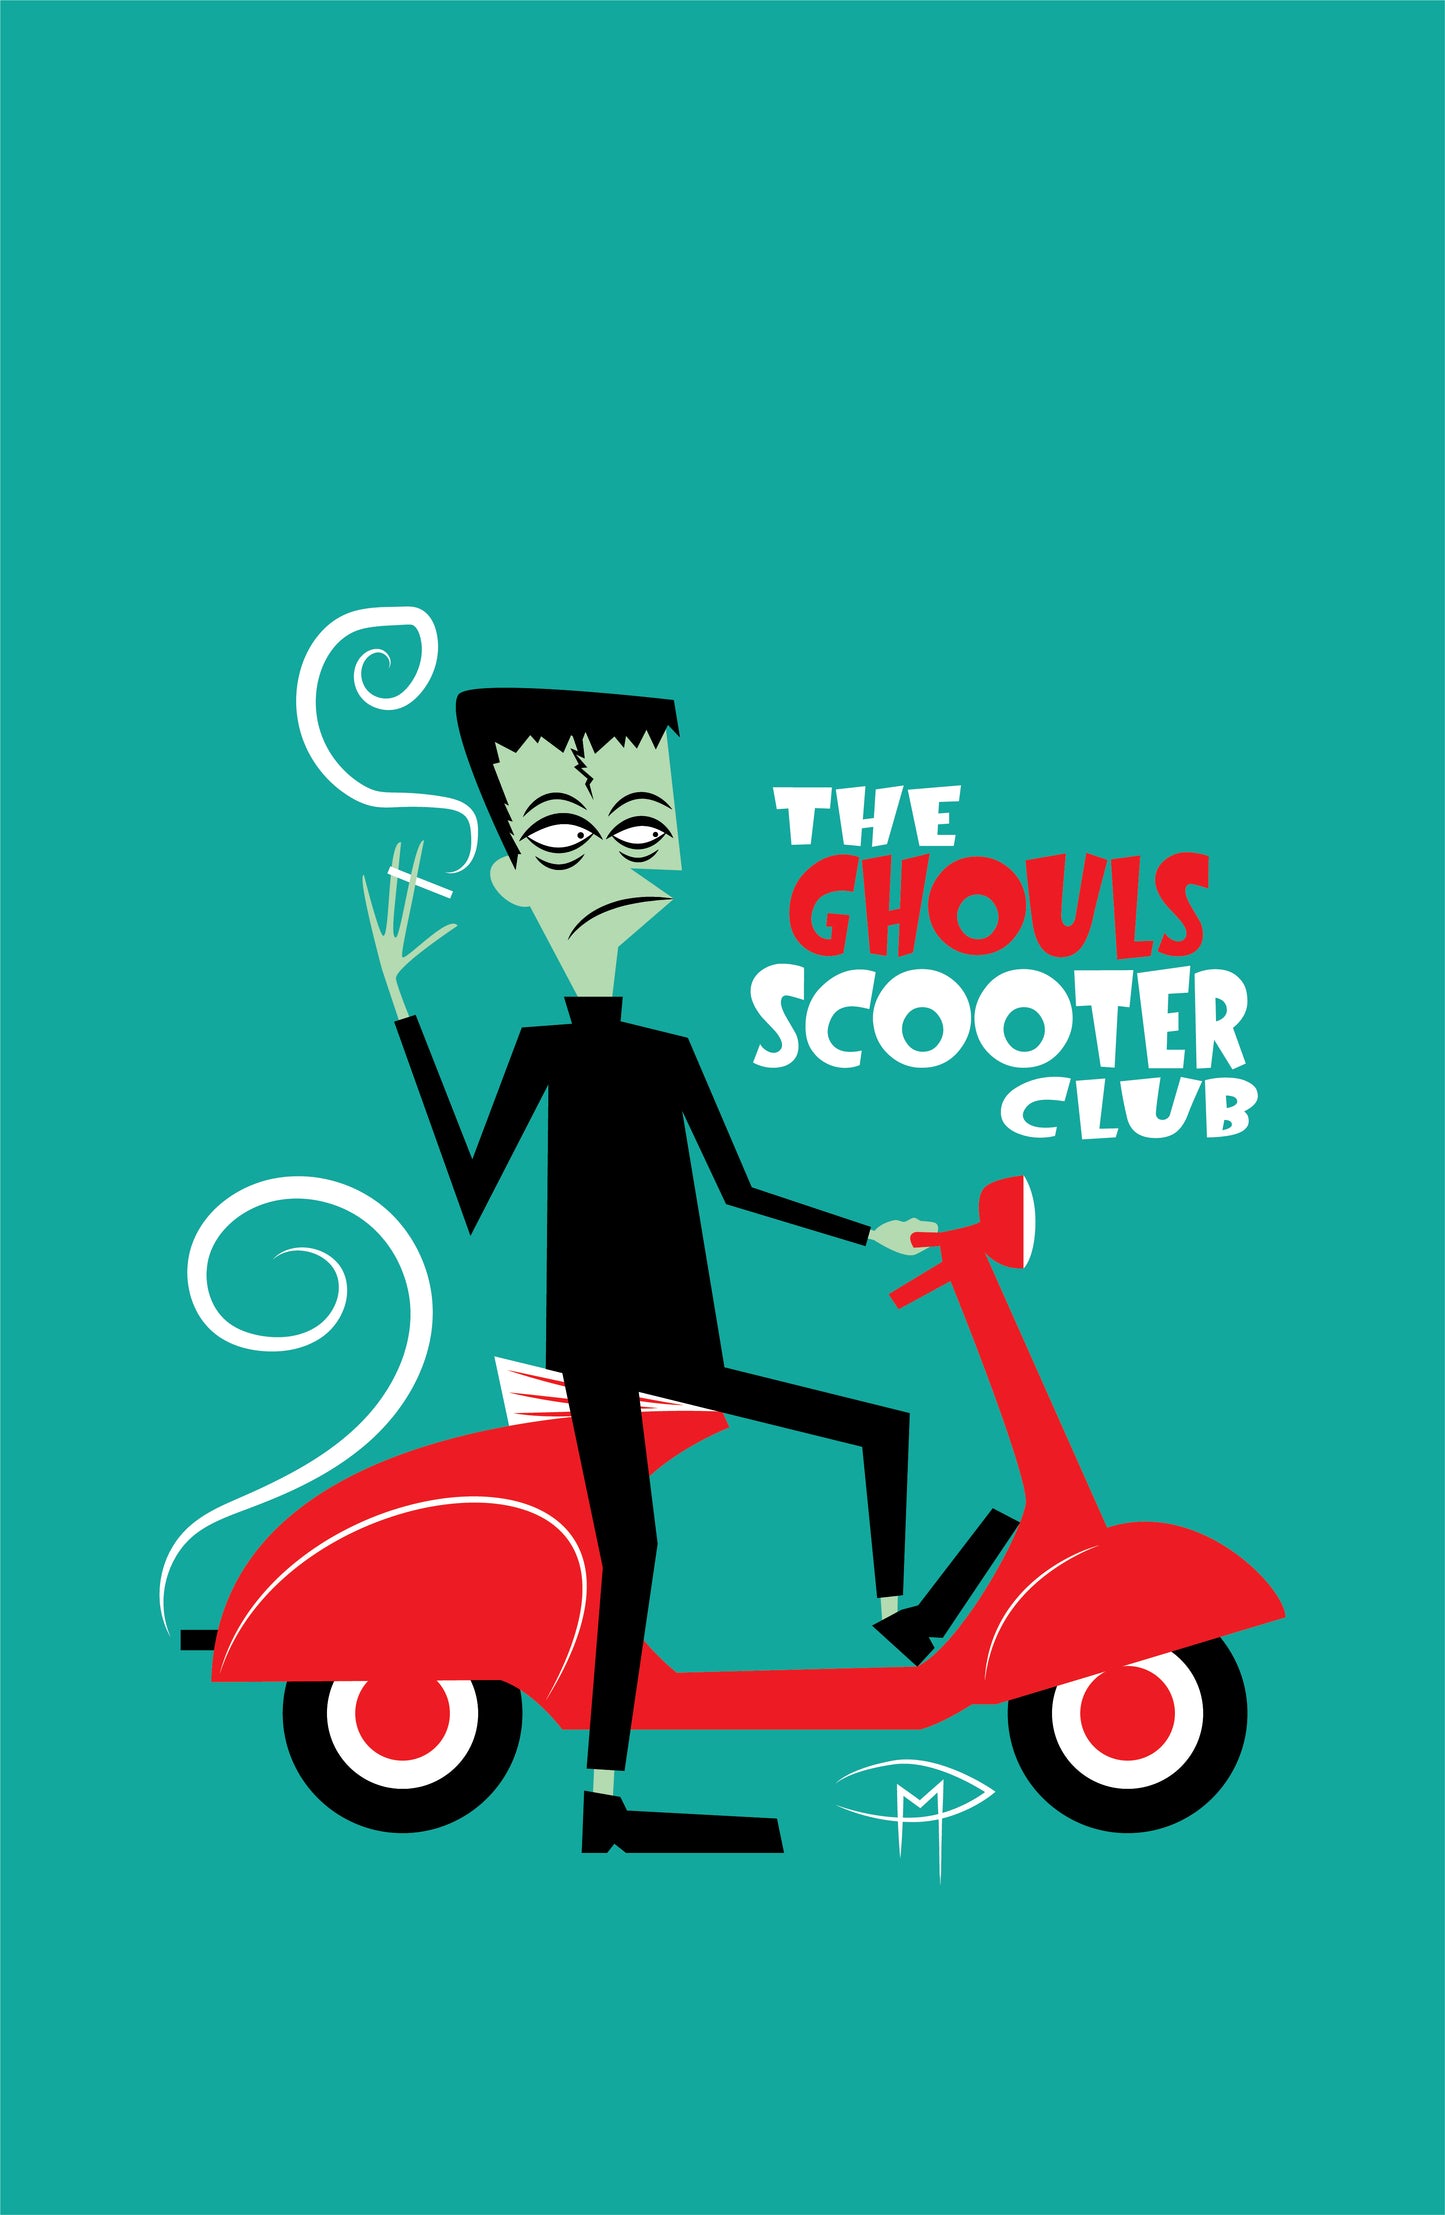 The Ghouls Scooter Club Poster